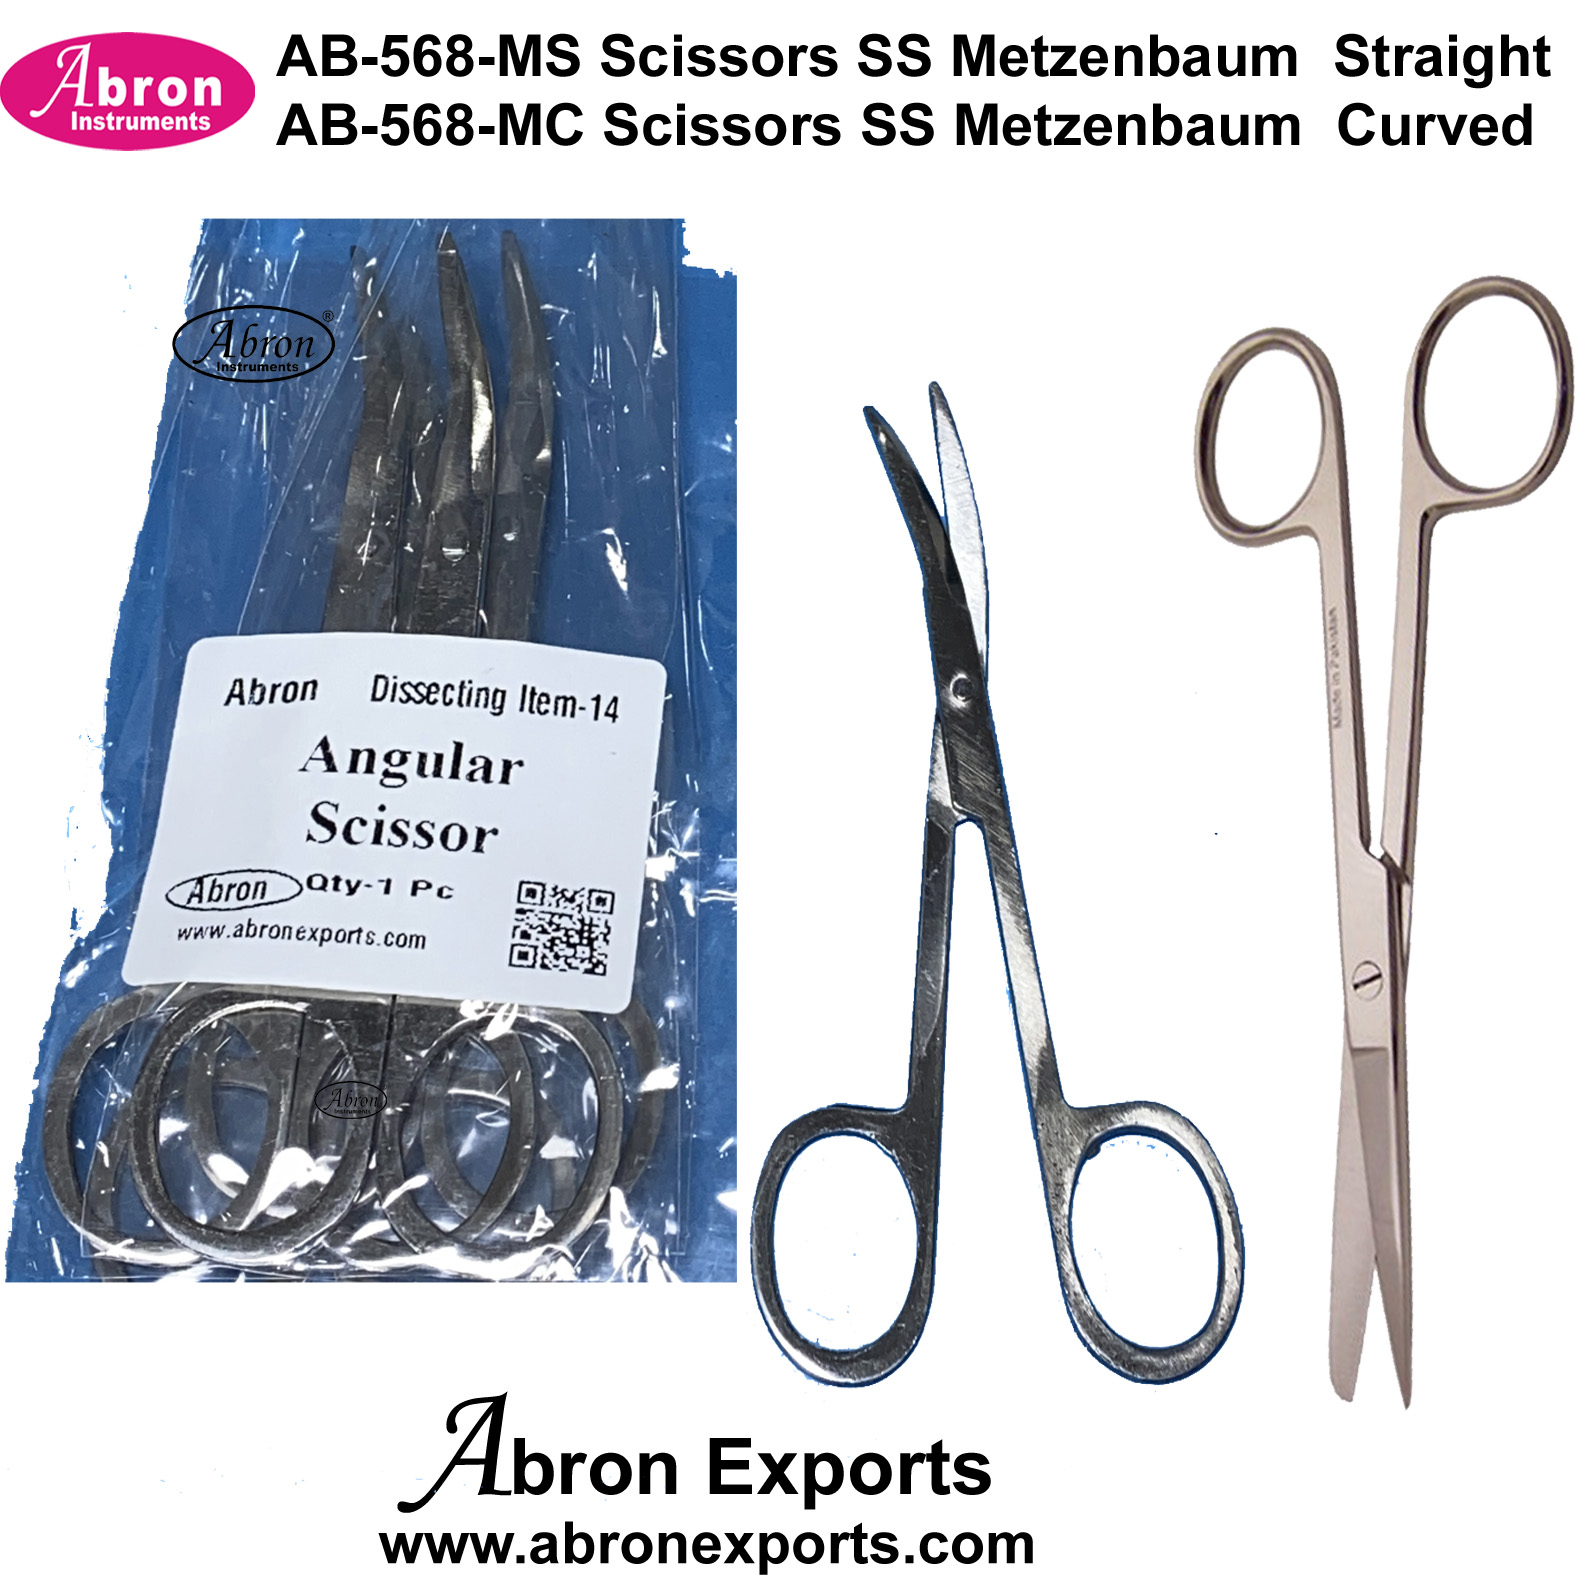 Scissors Surgical Metzenbaum straight curved  All Stainless steel Meals SS Handle 10pc Abron AB-568MC  